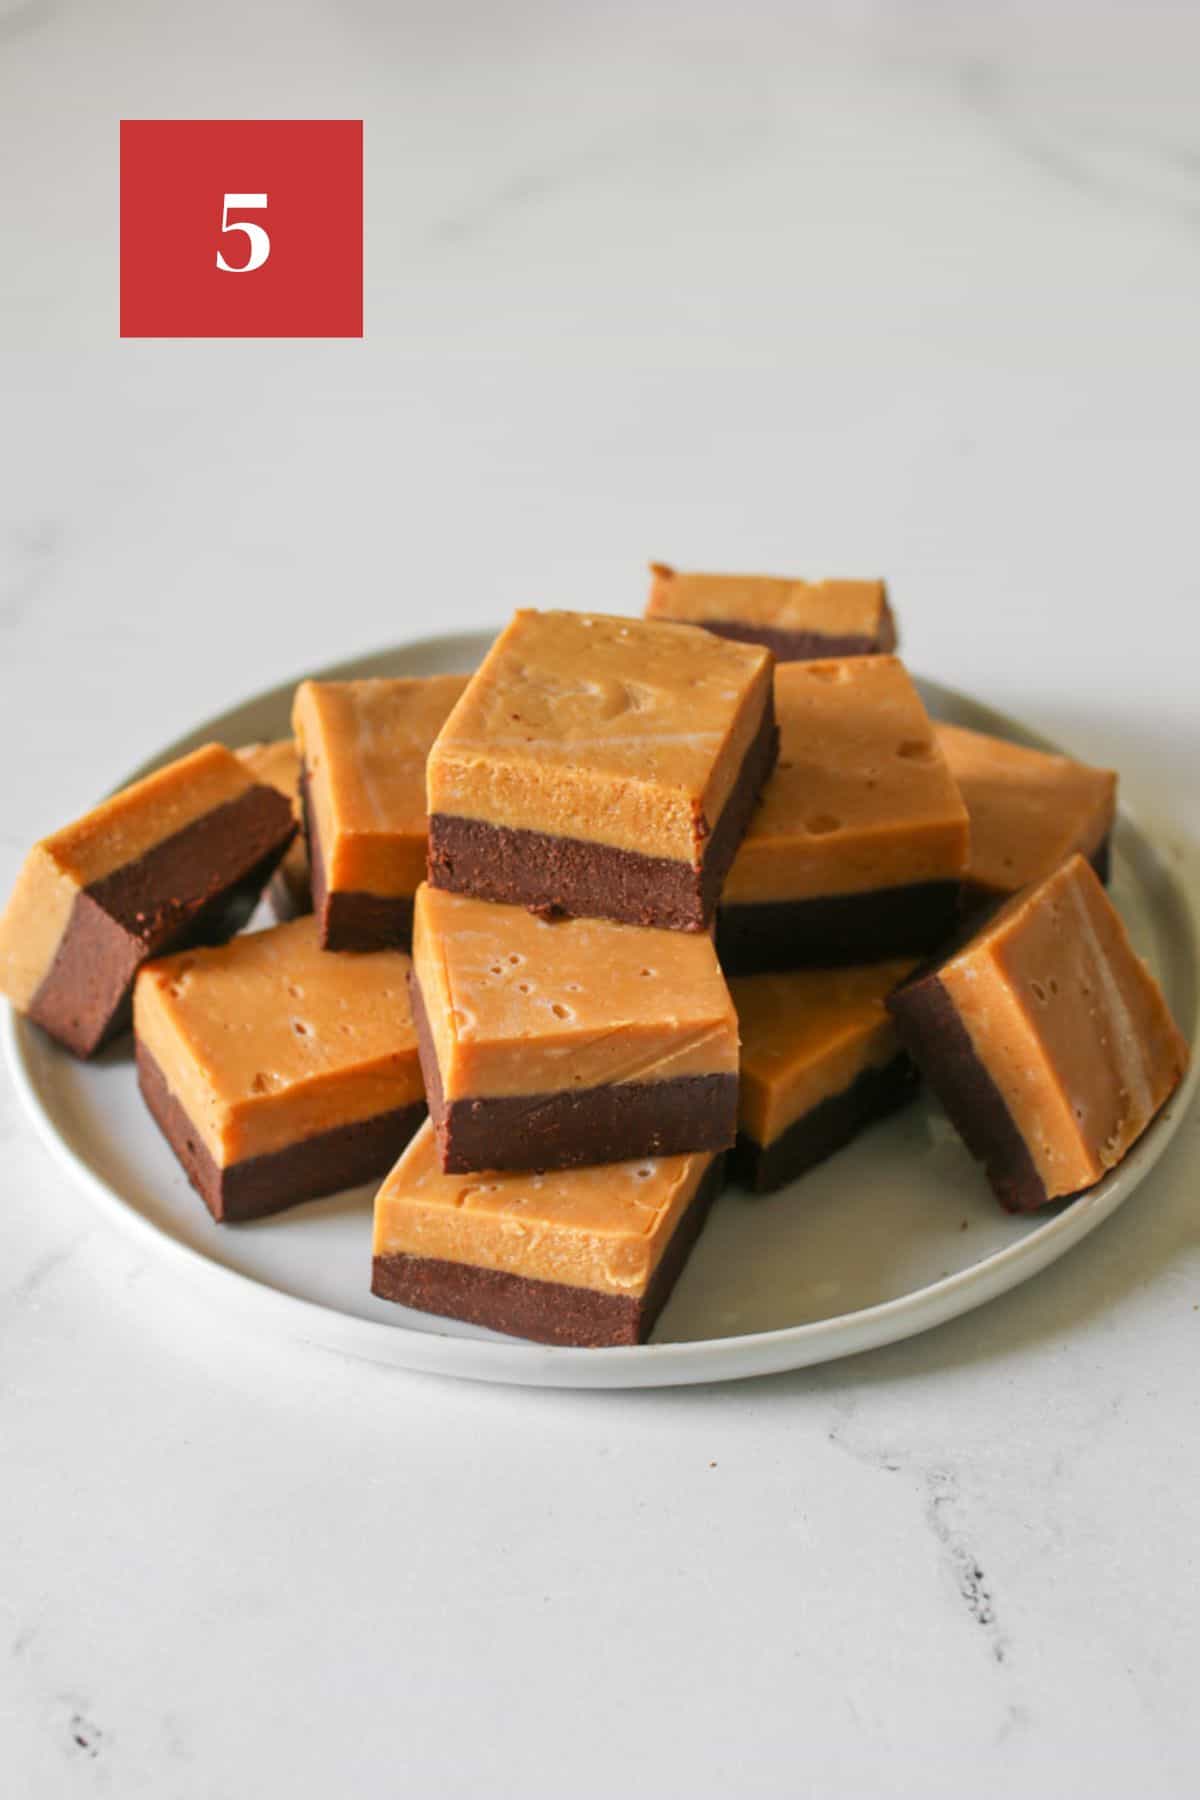 Sliced and stacked dulce de leche fudge on a white plate on a white background. In the upper left corner is a dark red square with a white '5' in the center.